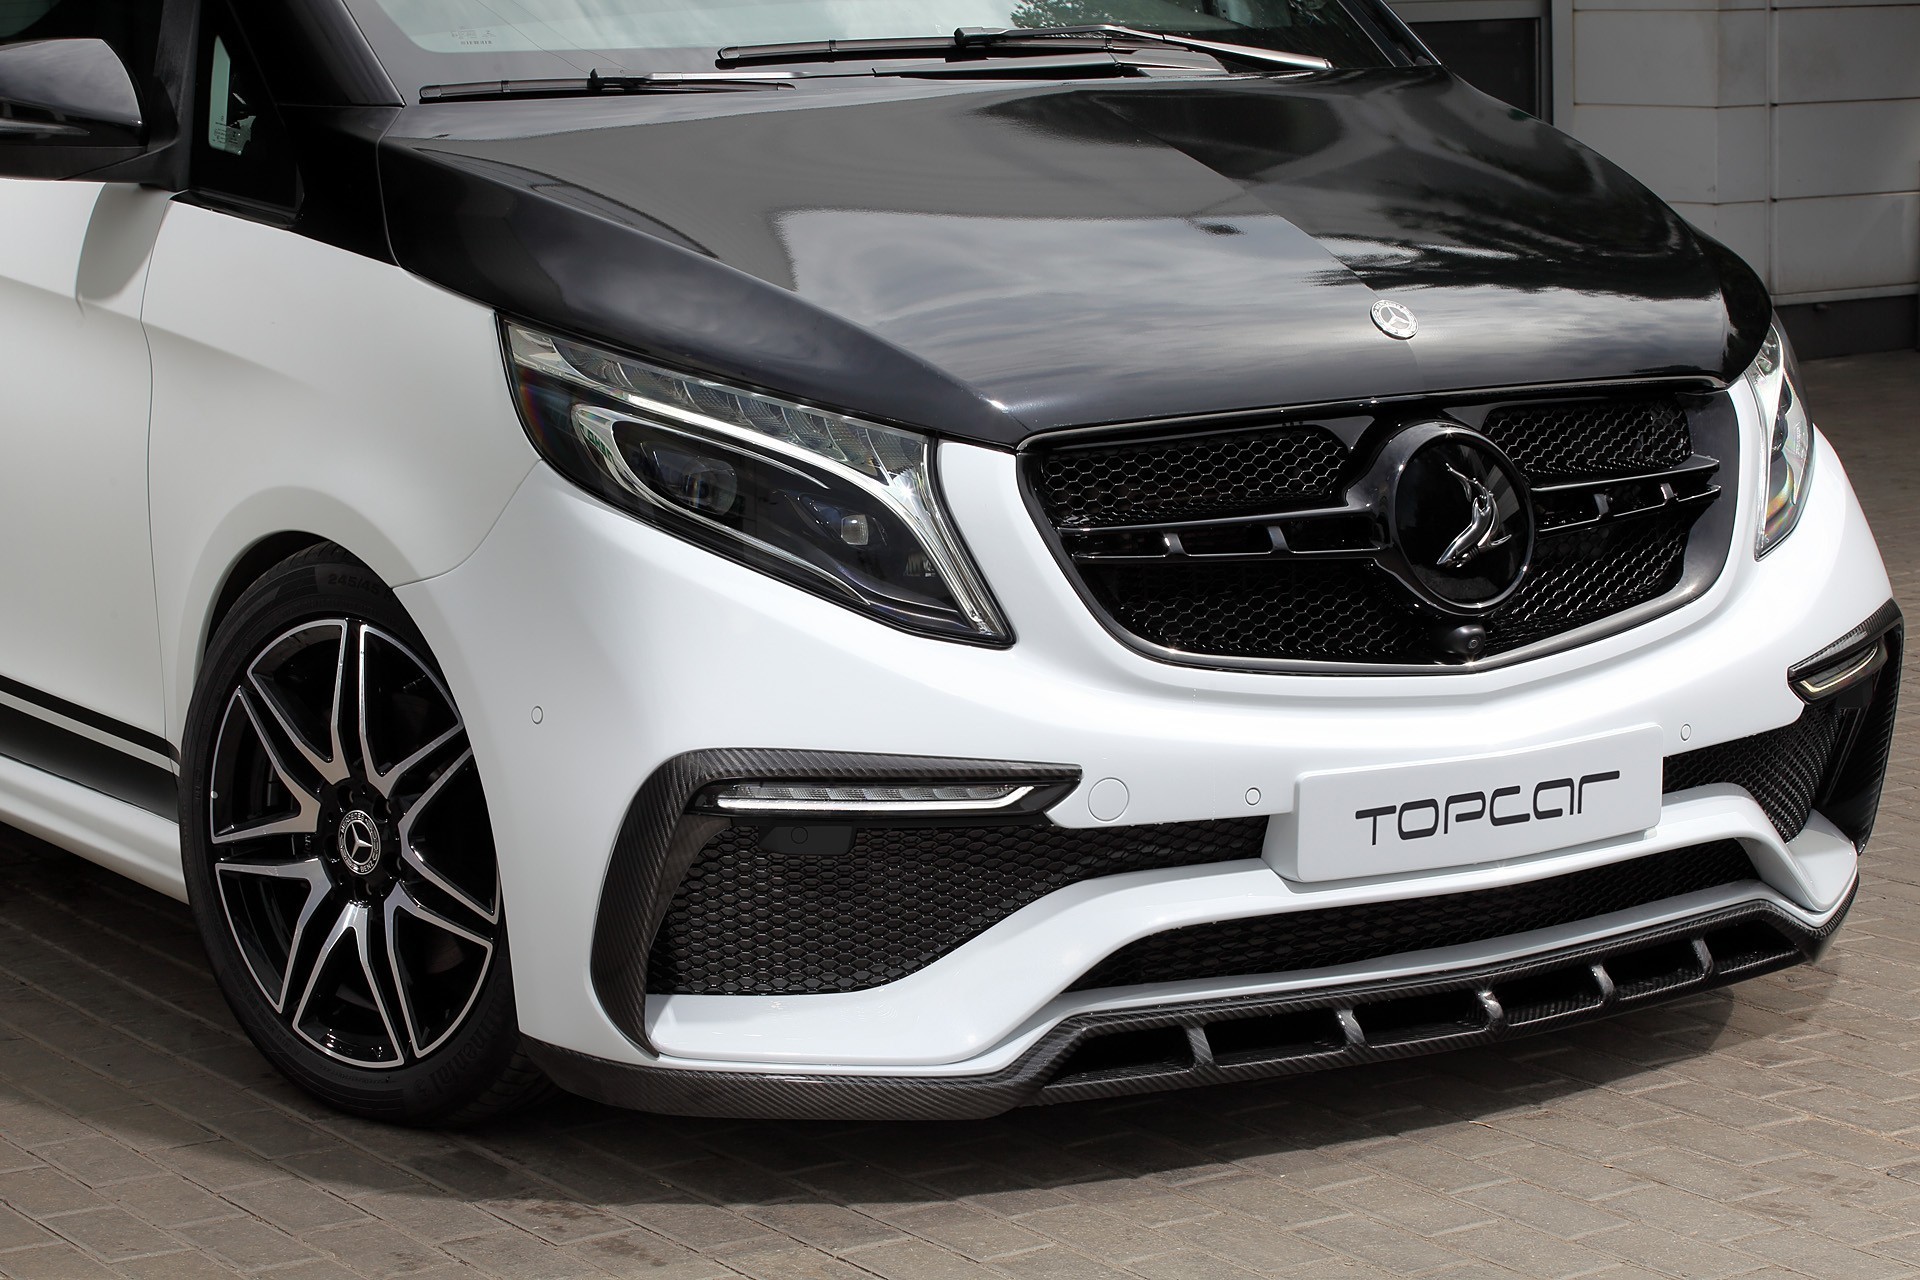 Topcar Design Carbon Fiber Body Kit Set for Mercedes V-class Buy with  delivery, installation, affordable price and guarantee